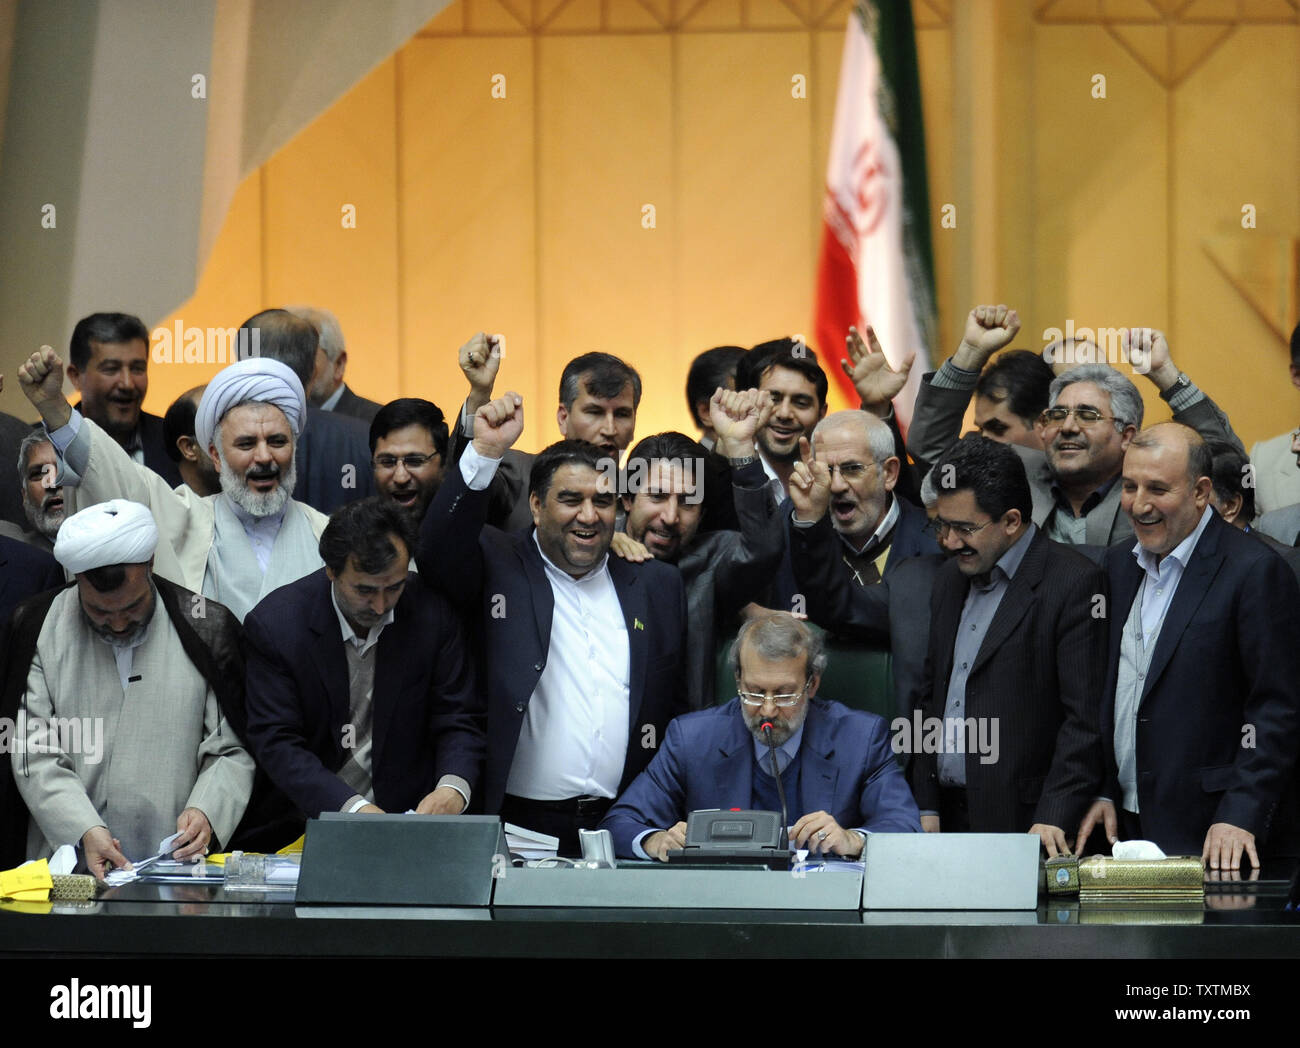 Iranian Parliamentary speaker Ali Larijani (C) delivers the result of the impeachment of the labor minister Abdolreza Sheikholeslami, unseen, at the parliament in Tehran, Iran on February 3, 2013. Out of 272 lawmakers in the parliament on Sunday, 192 voted against the labor minister. The main reason behind the MP's decision to dismiss the minister was Sheikholeslami's refusal  to remove former Tehran prosecutor general Saeed Mortazavi from his post as the director of the Social Security Organization.     UPI/Maryam Rahmanian Stock Photo